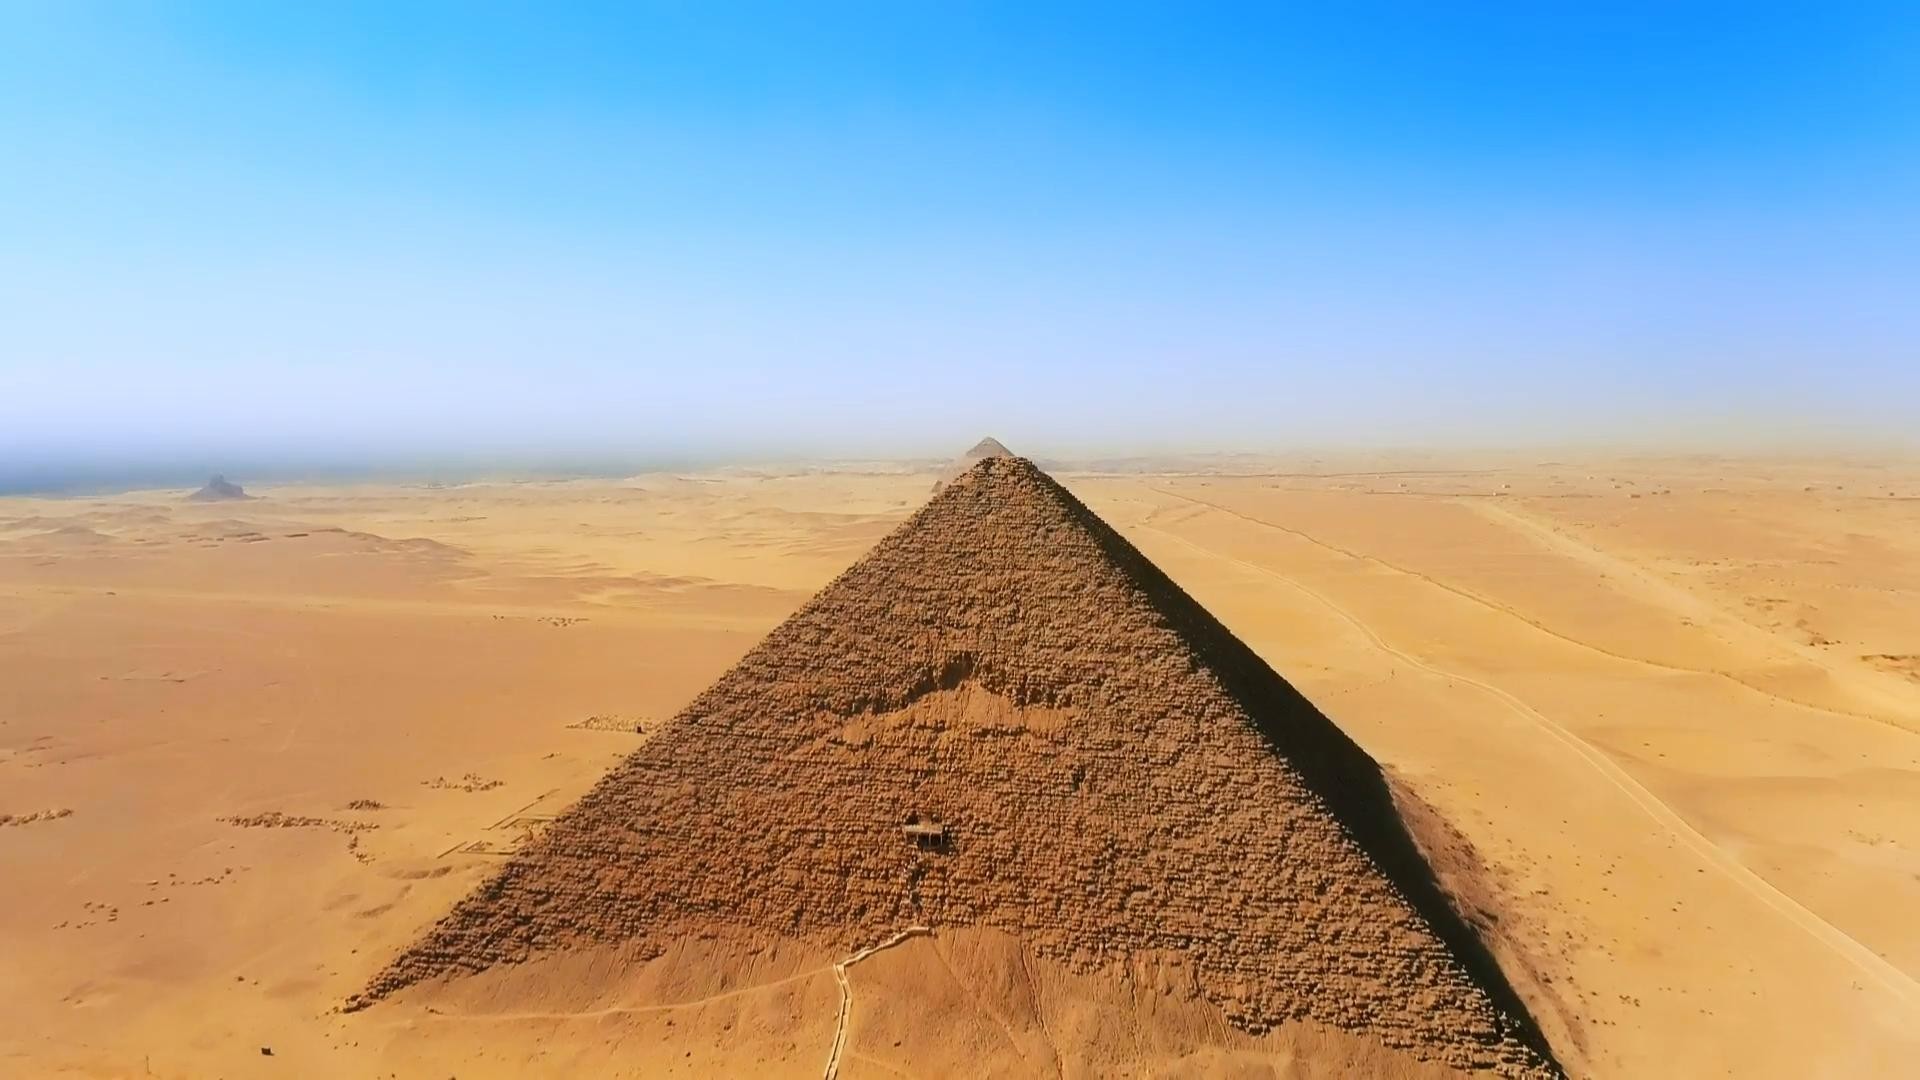 THE RED PYRAMID